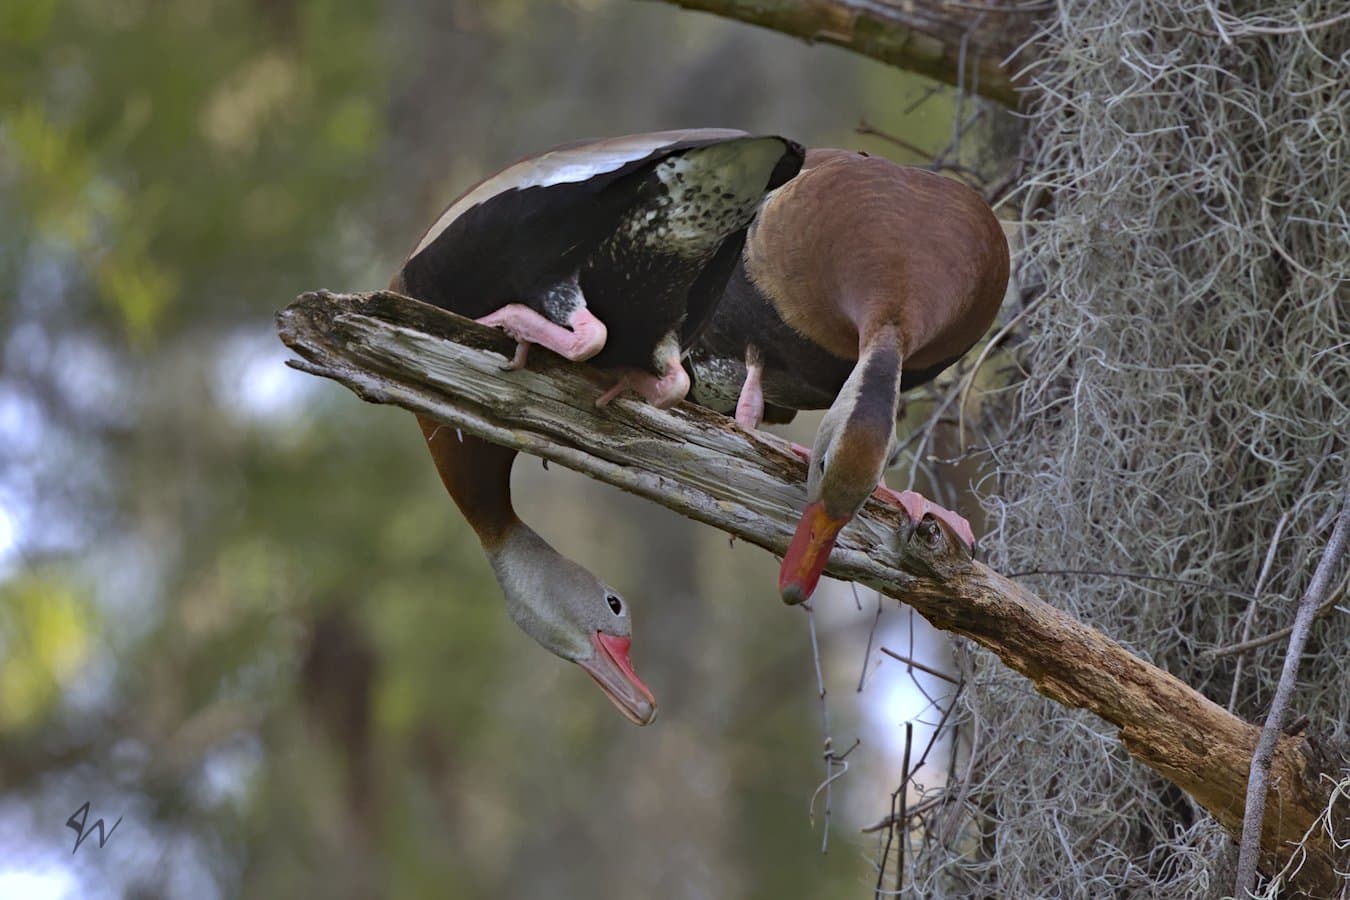 Two Black-bellied Whistling Ducks looking at eachother under branch they are perched on in opposite directions.